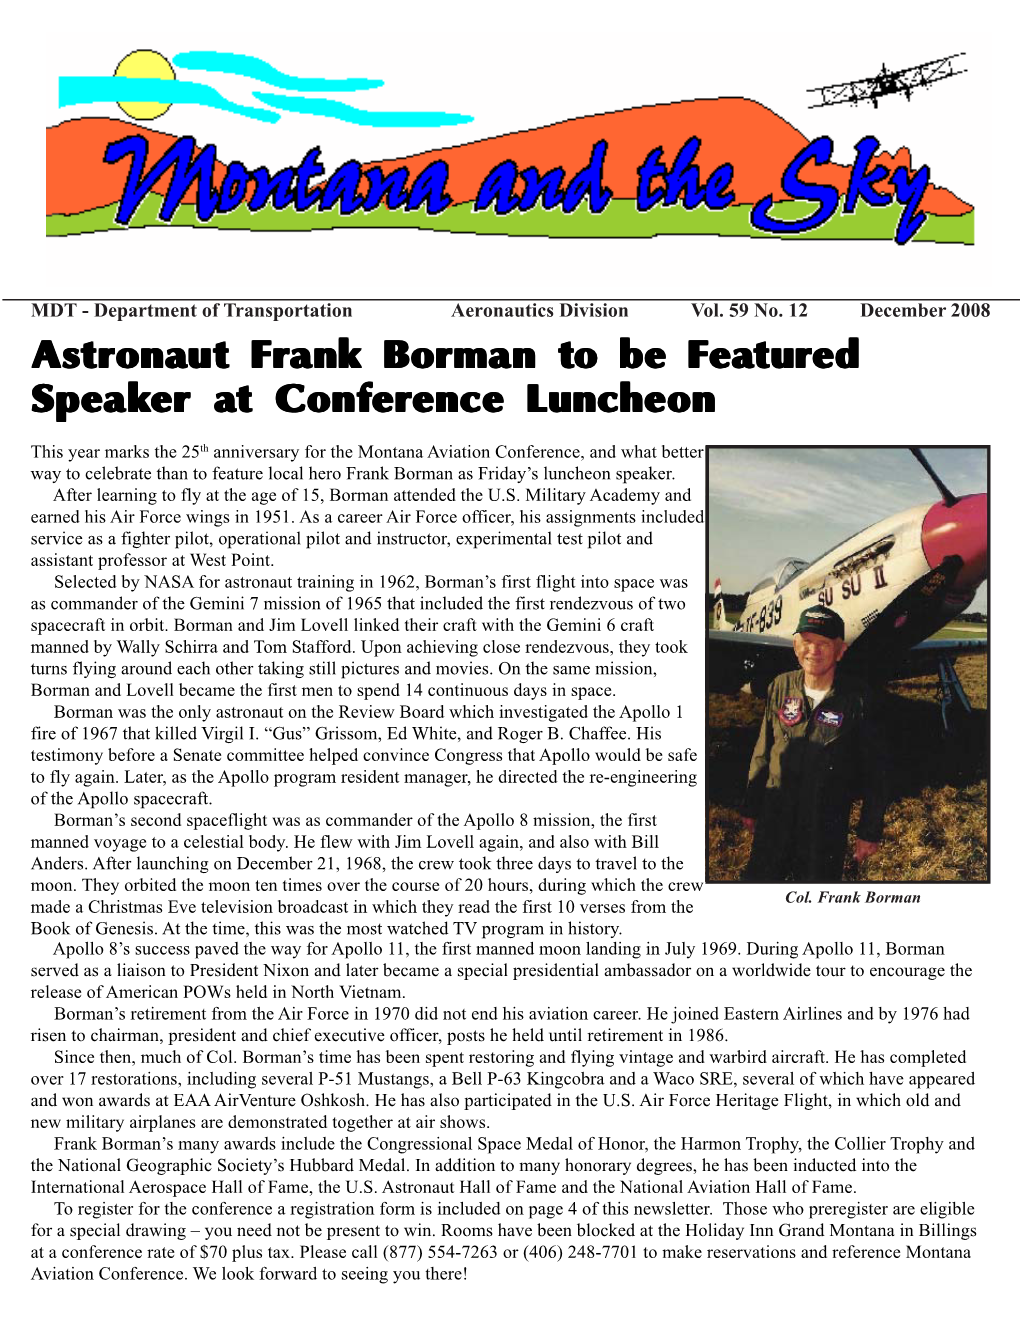 Vol. 59 No. 12 December 2008 Astronaut Frank Borman to Be Featured Speaker at Conference Luncheon